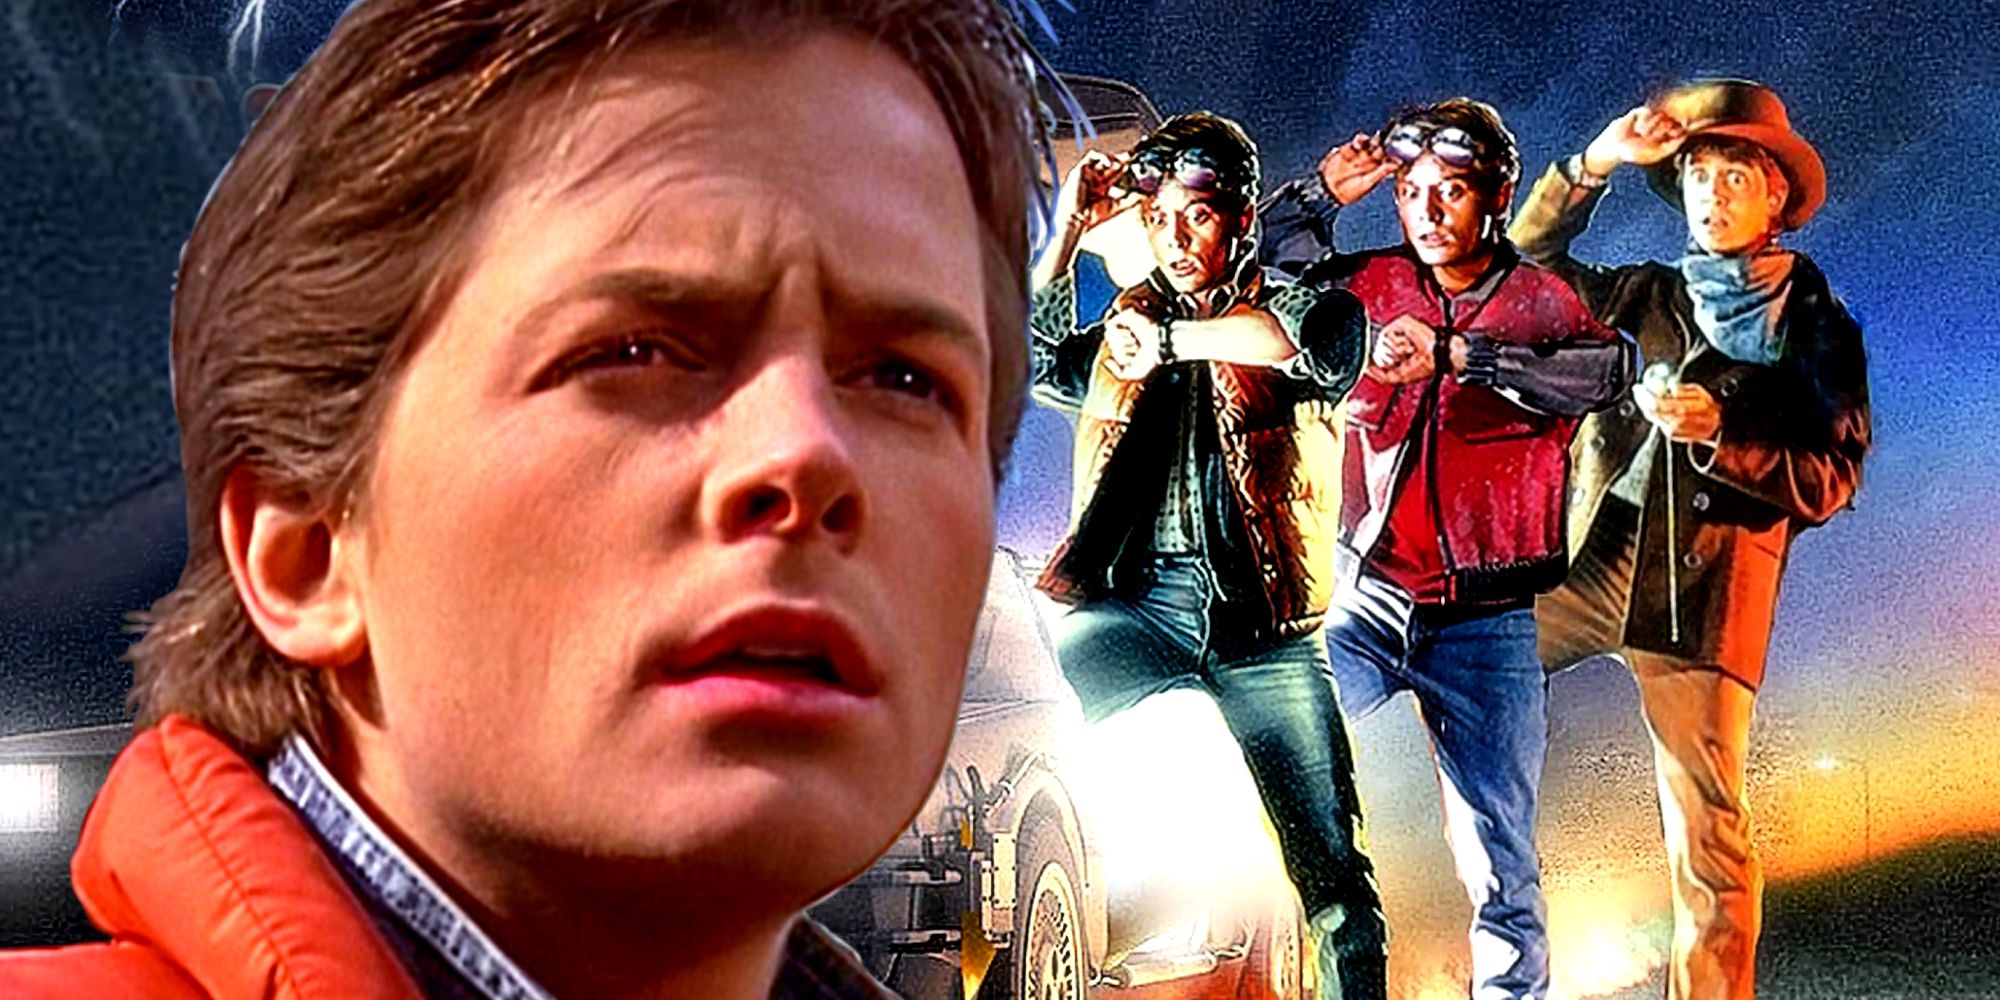 Michael J. Fox's Marty McFly in the Back to the Future Trilogy